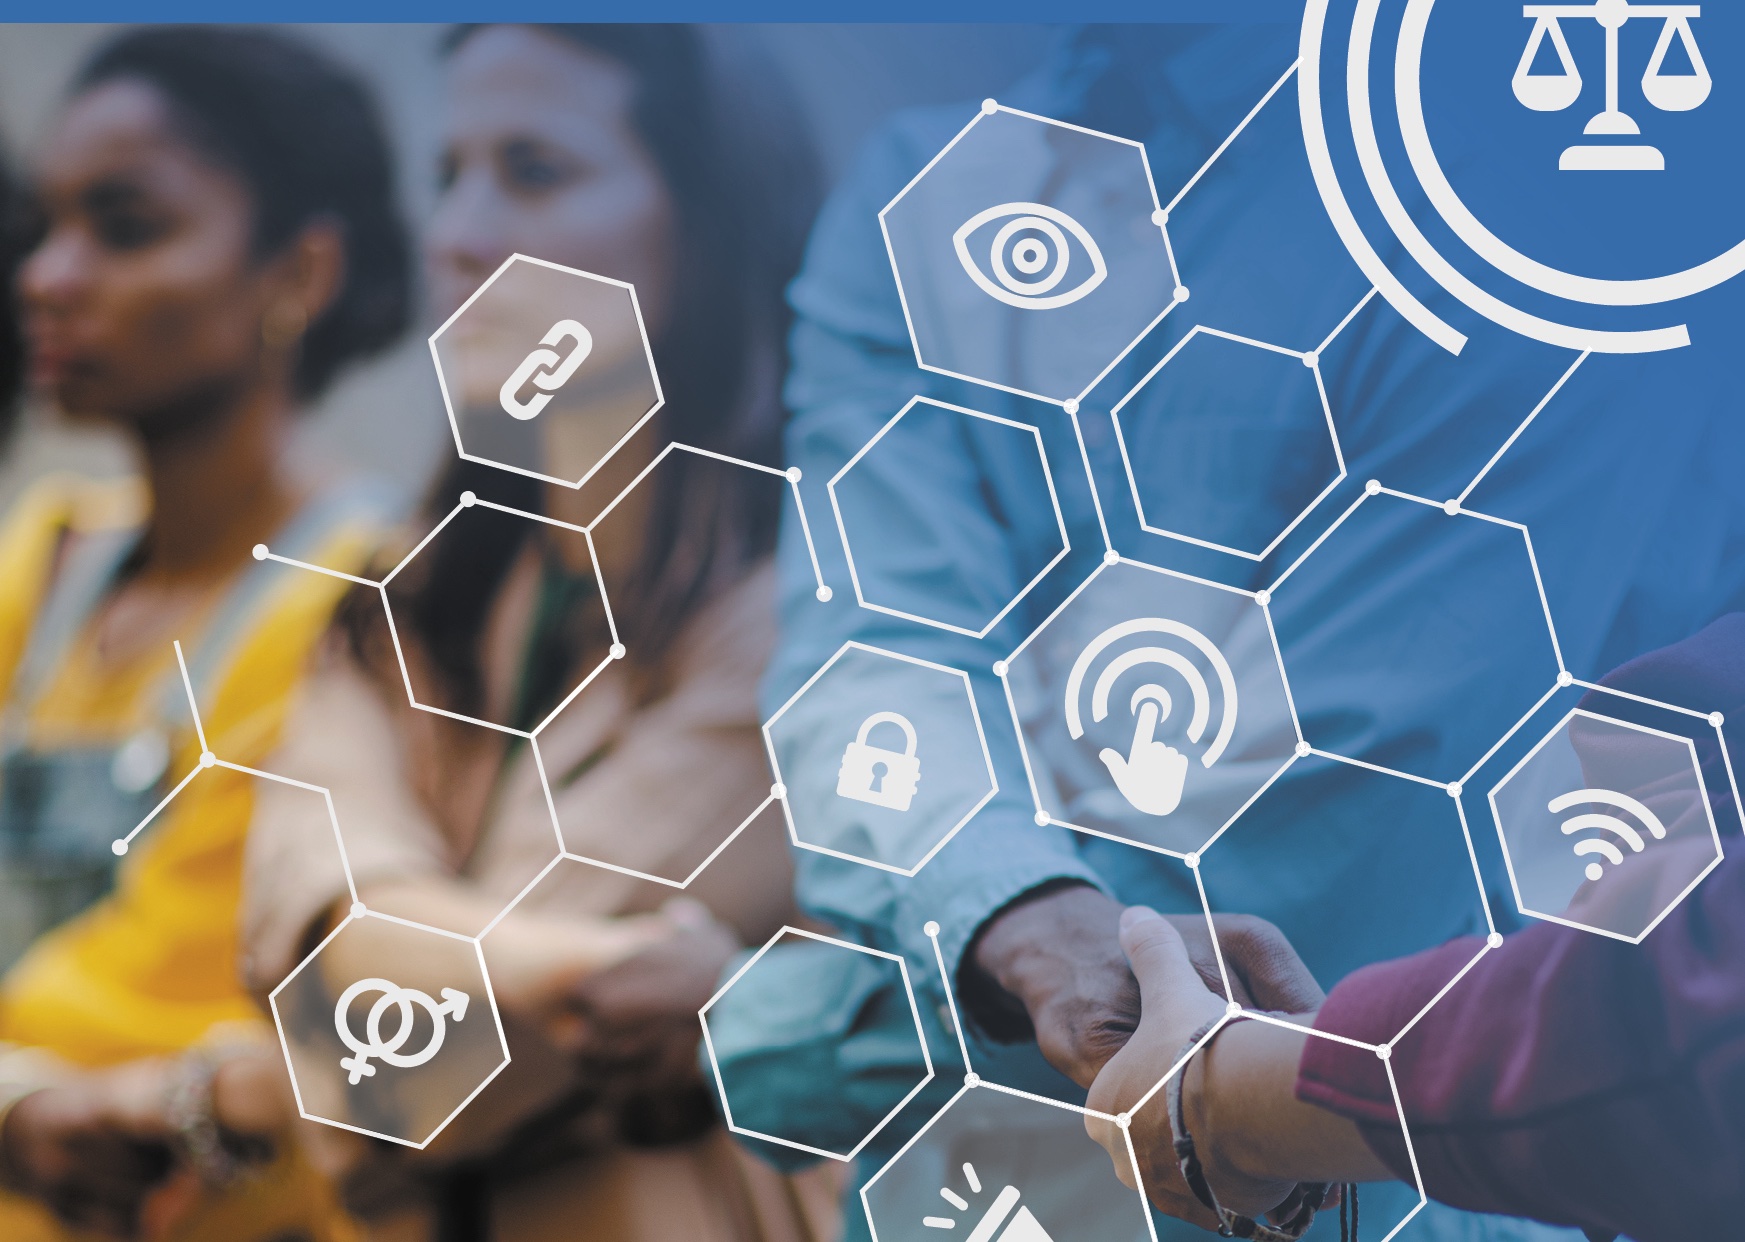 Background of people standing in a line holding hands with crossed arms. Overlay of honeycomb pattern with graphics of an eye, a chain link, a padlock, a wifi symbol, a hand clicking a button, a justice scales, and the symbols for man and woman intertwined.